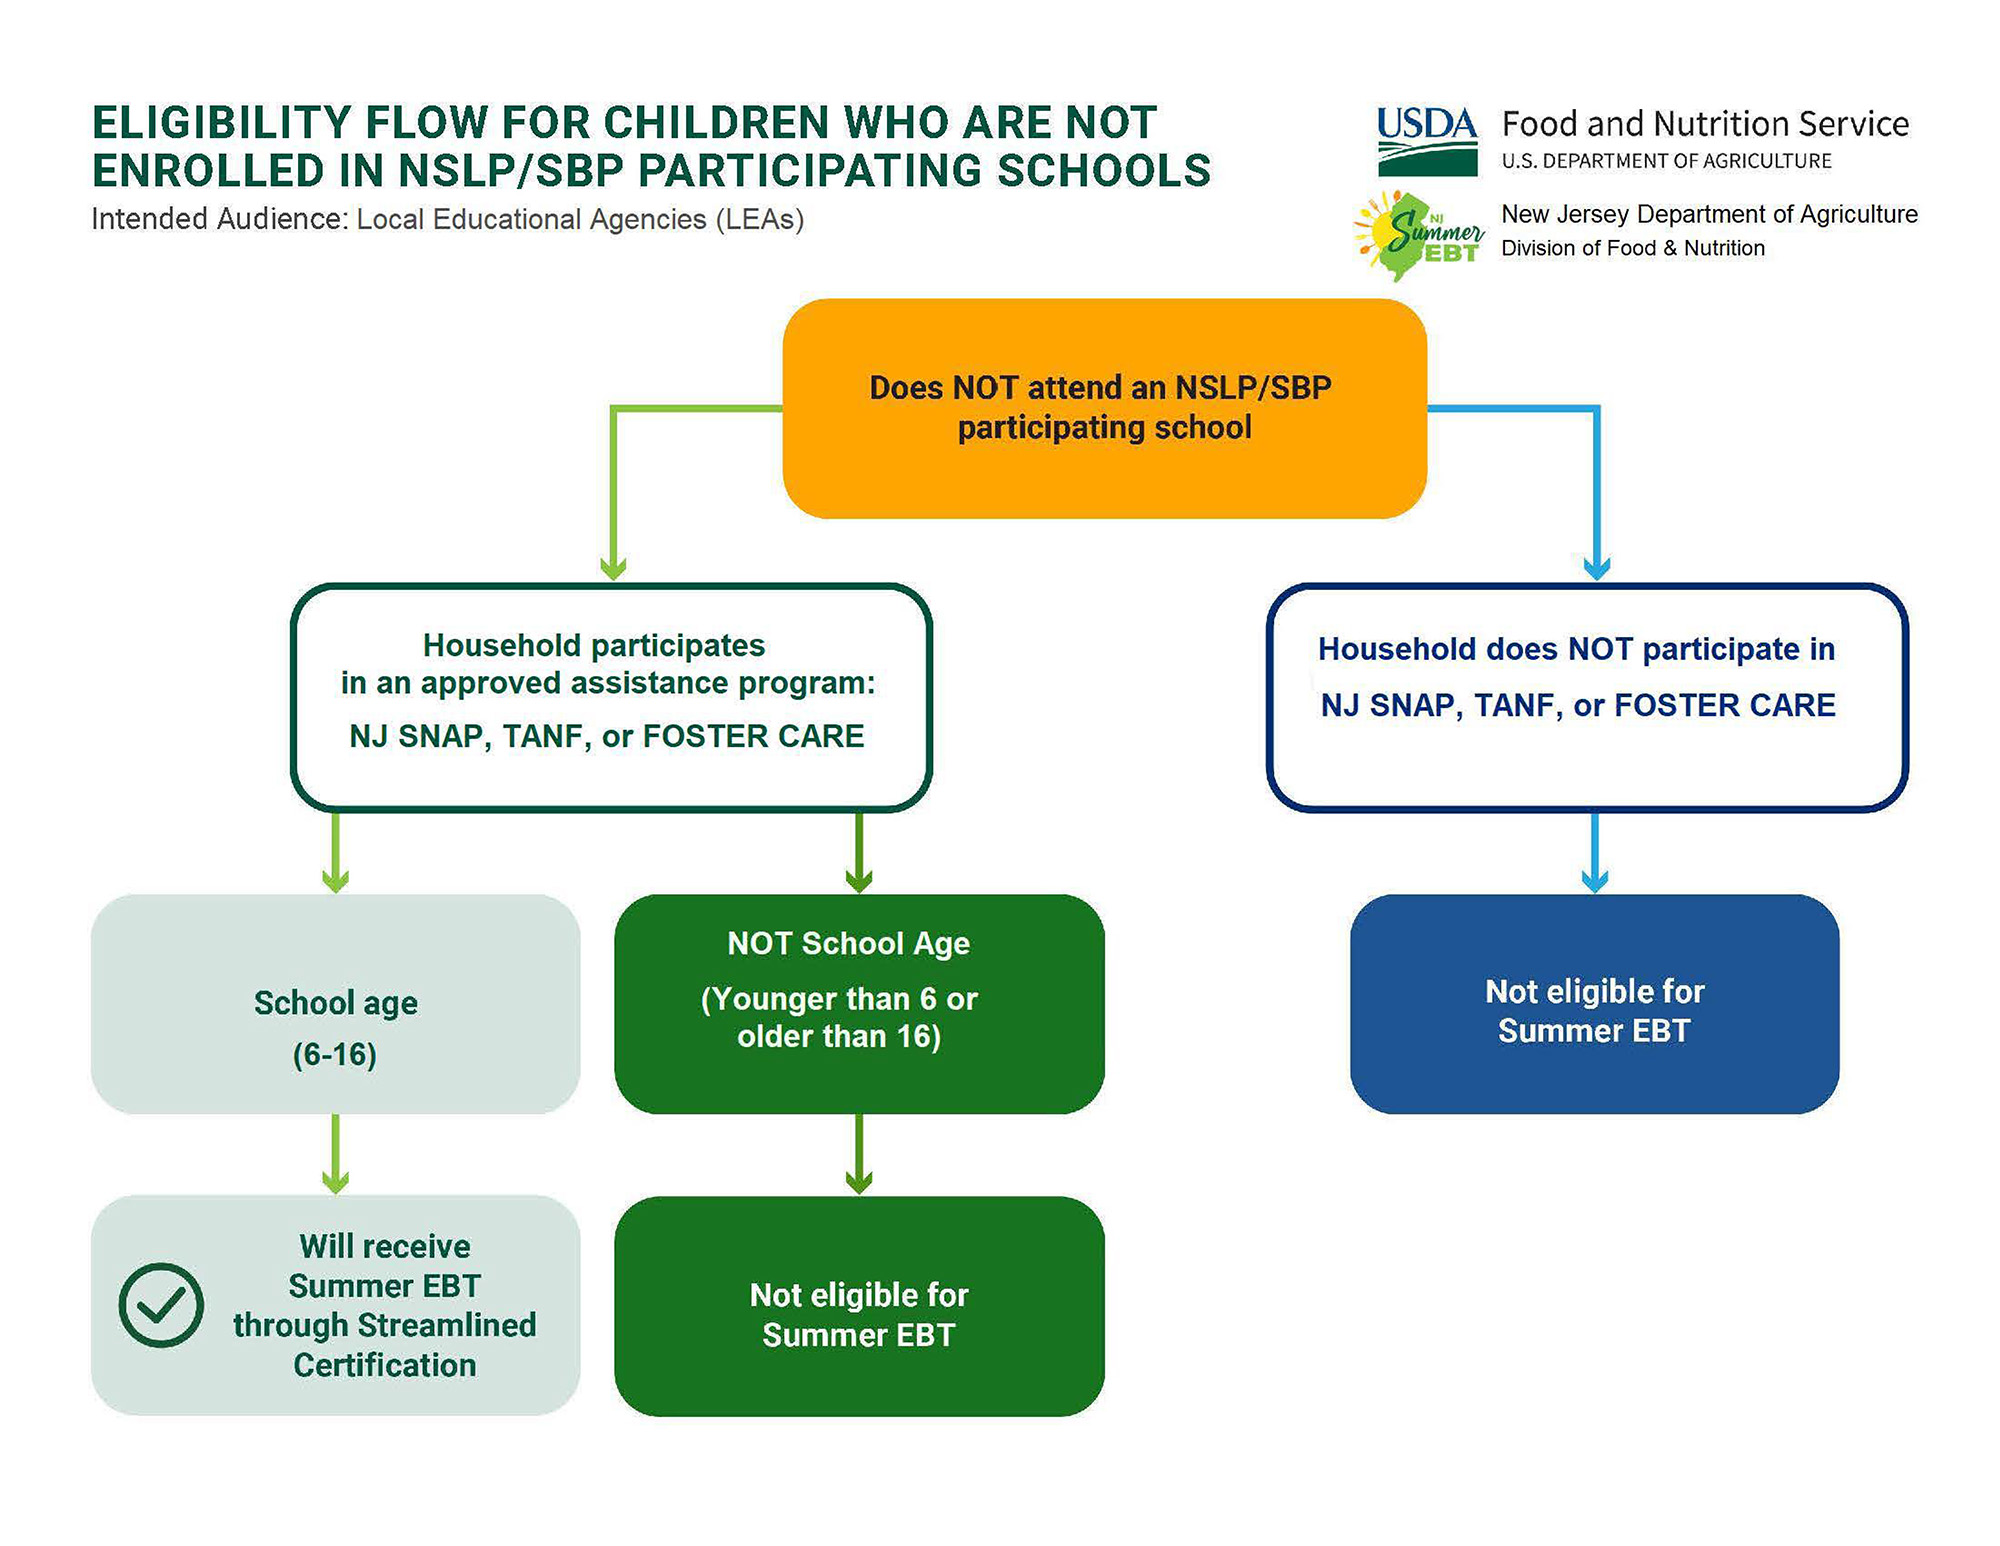 ELIGIBILITY FLOW FOR CHILDREN WHO ARE NOT ENROLLED IN NSLP/SBP PARTICIPATING SCHOOLS